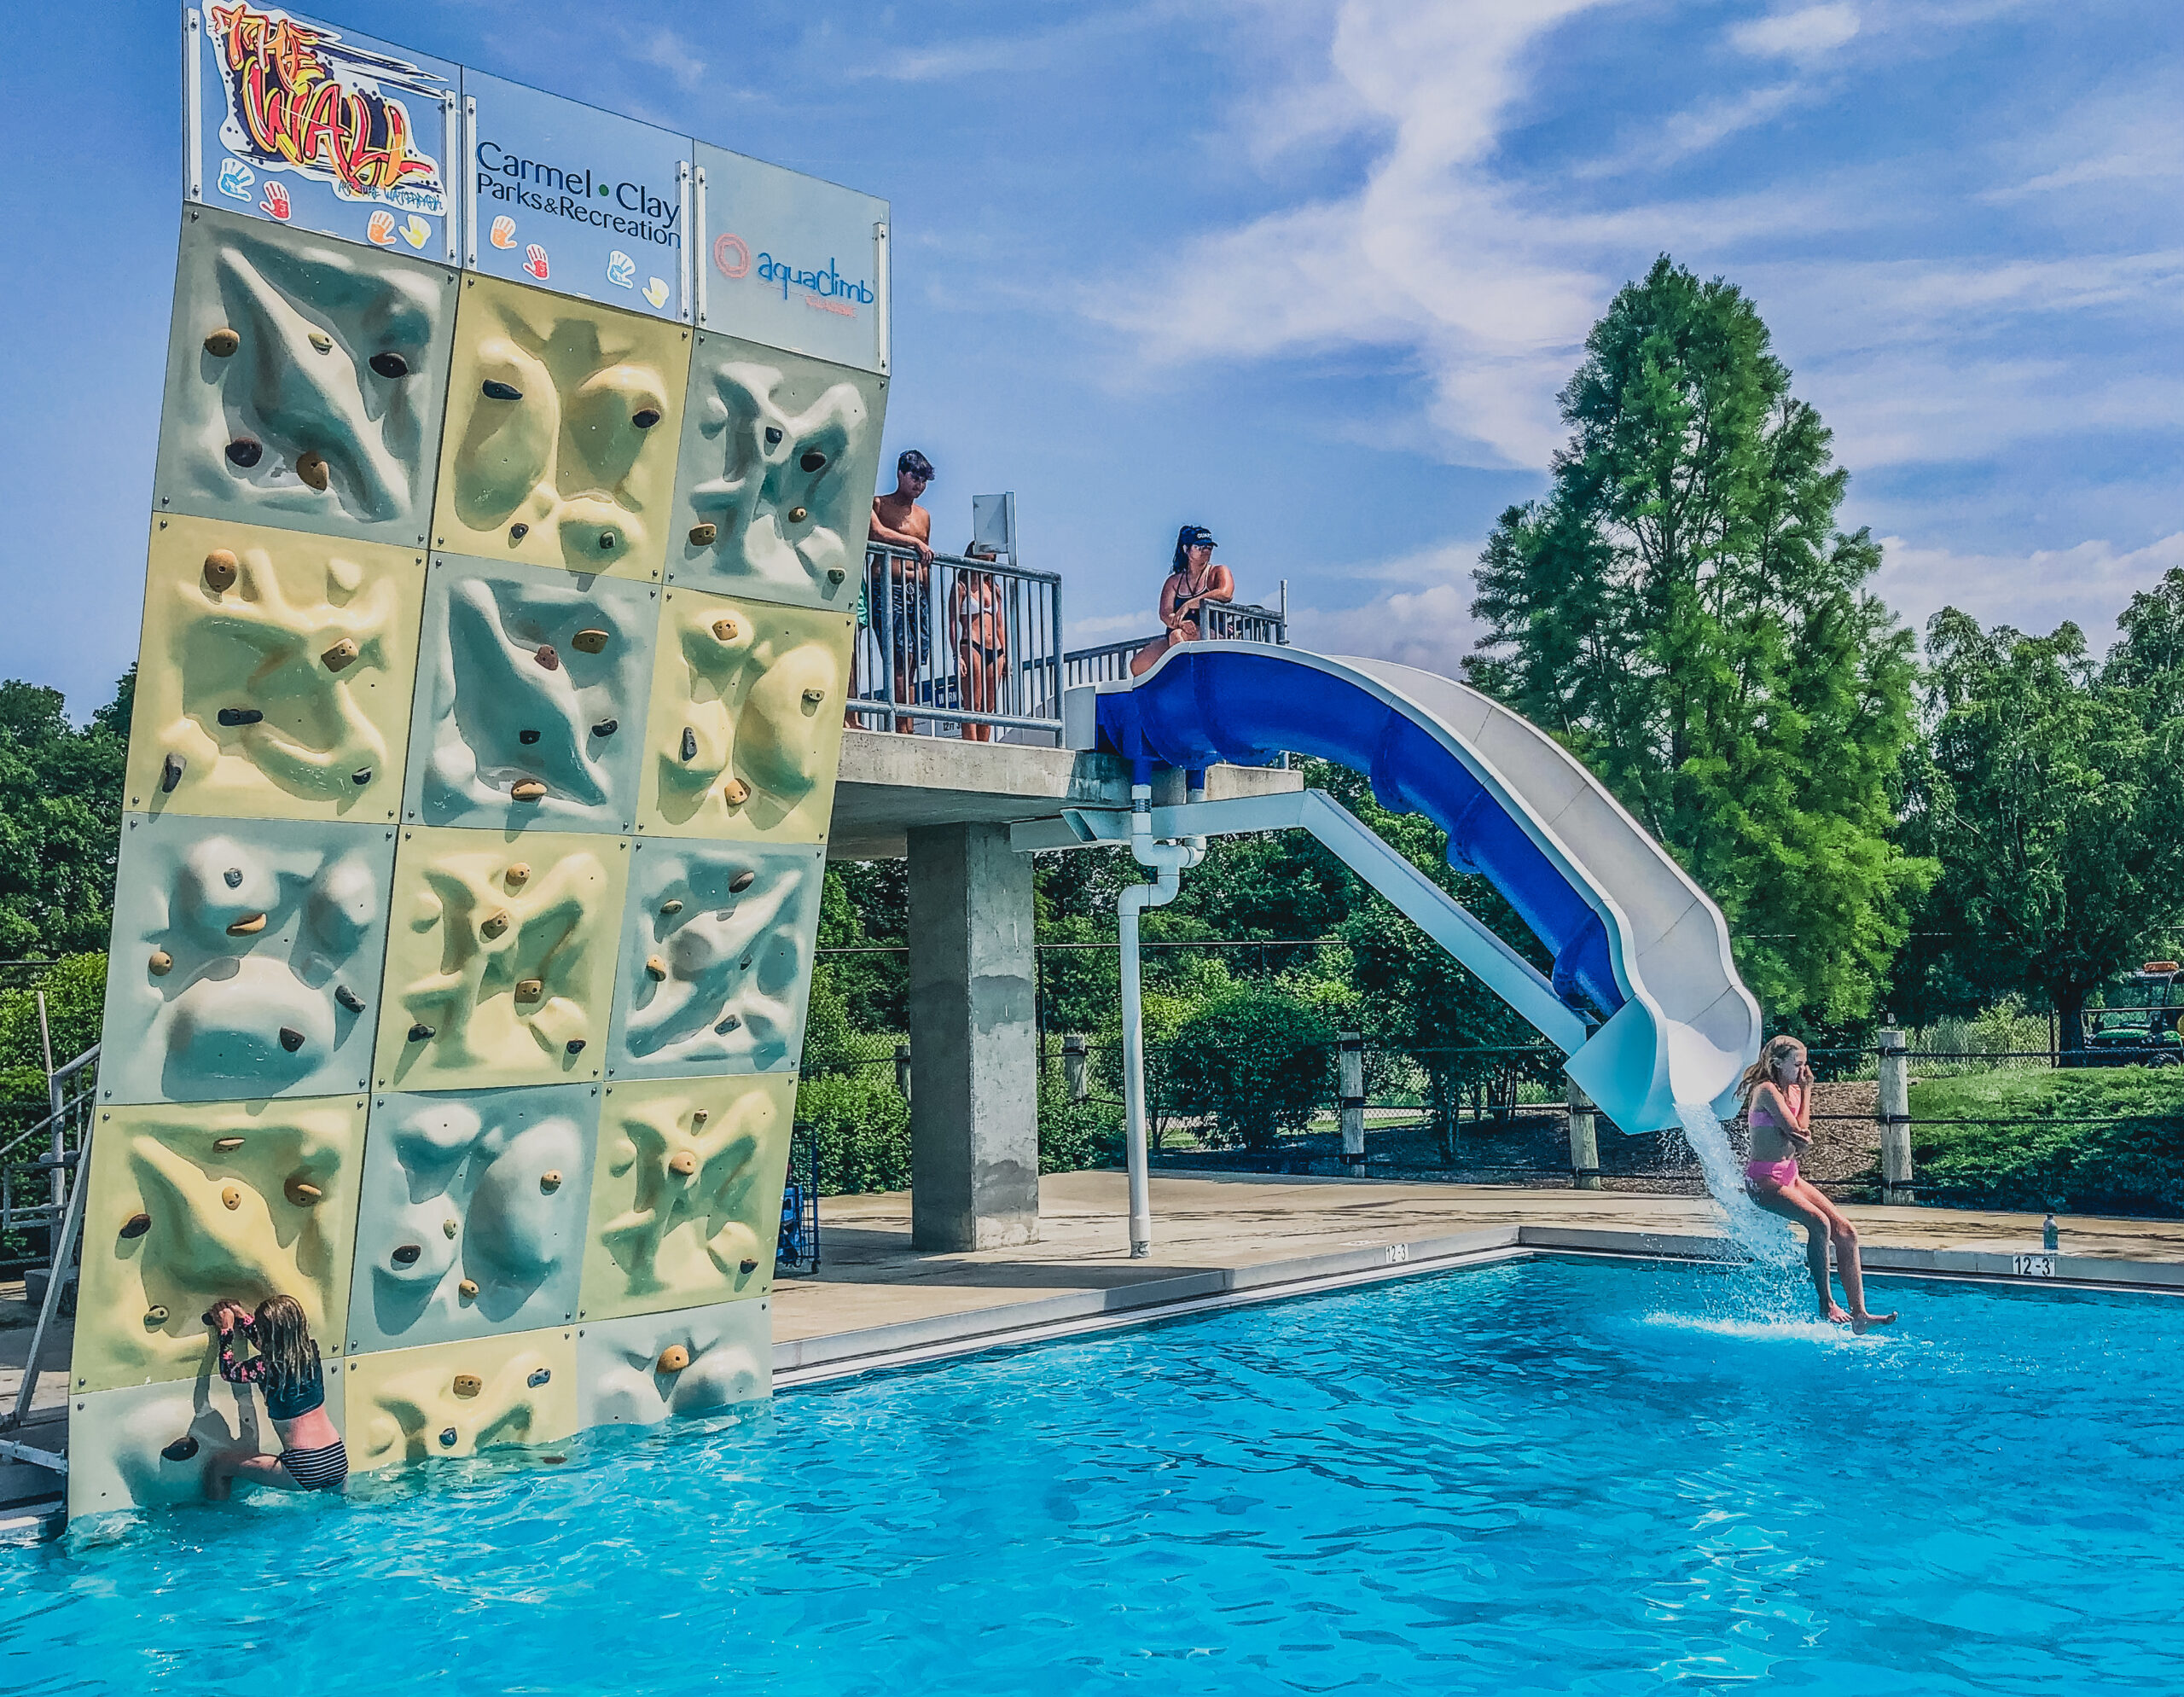 kiddo scales the wall in the dive well at The Waterpark while another splashes into the pool off of the Plunge Slide